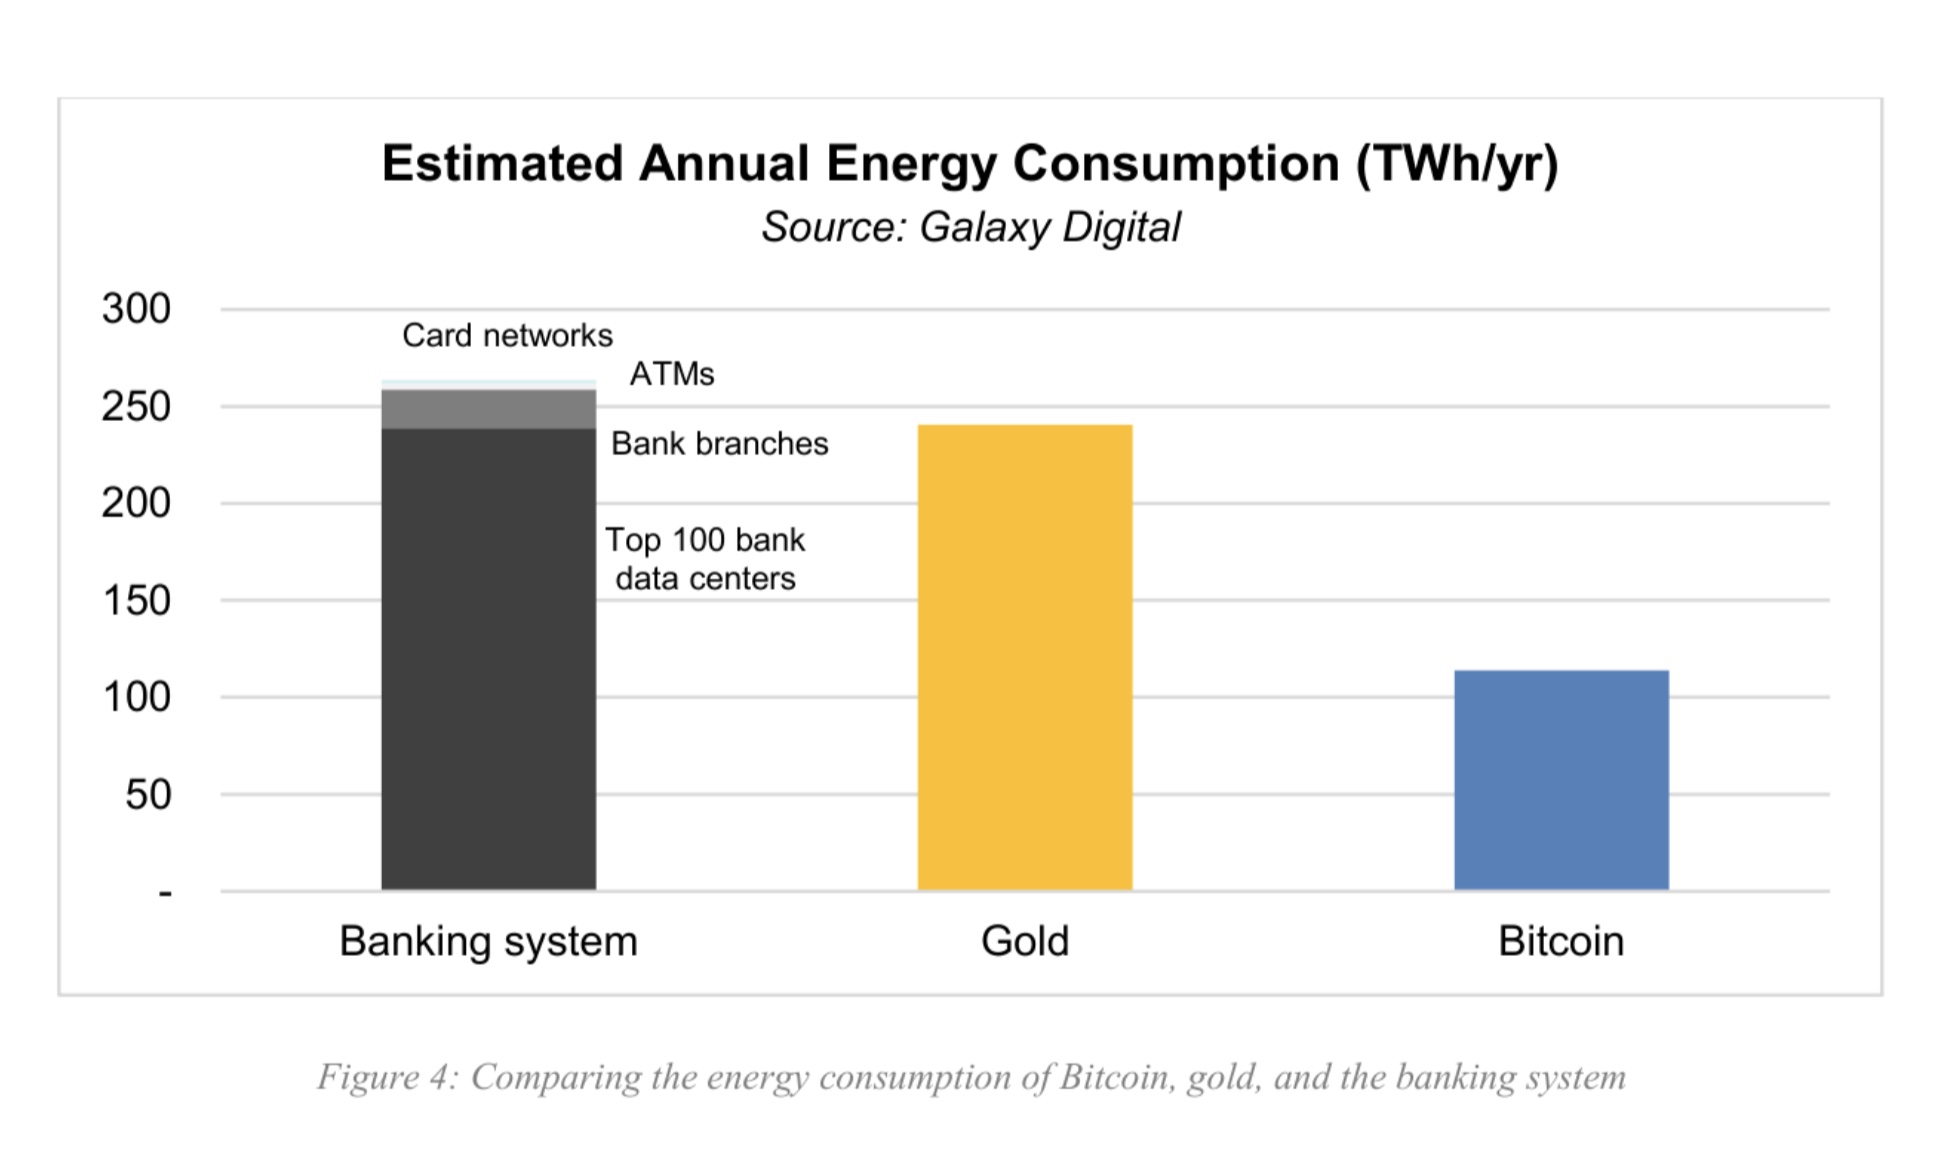 Bitcoin Consumes Less Than 50% the Energy of the Banking or Gold Industries, Research Reveals